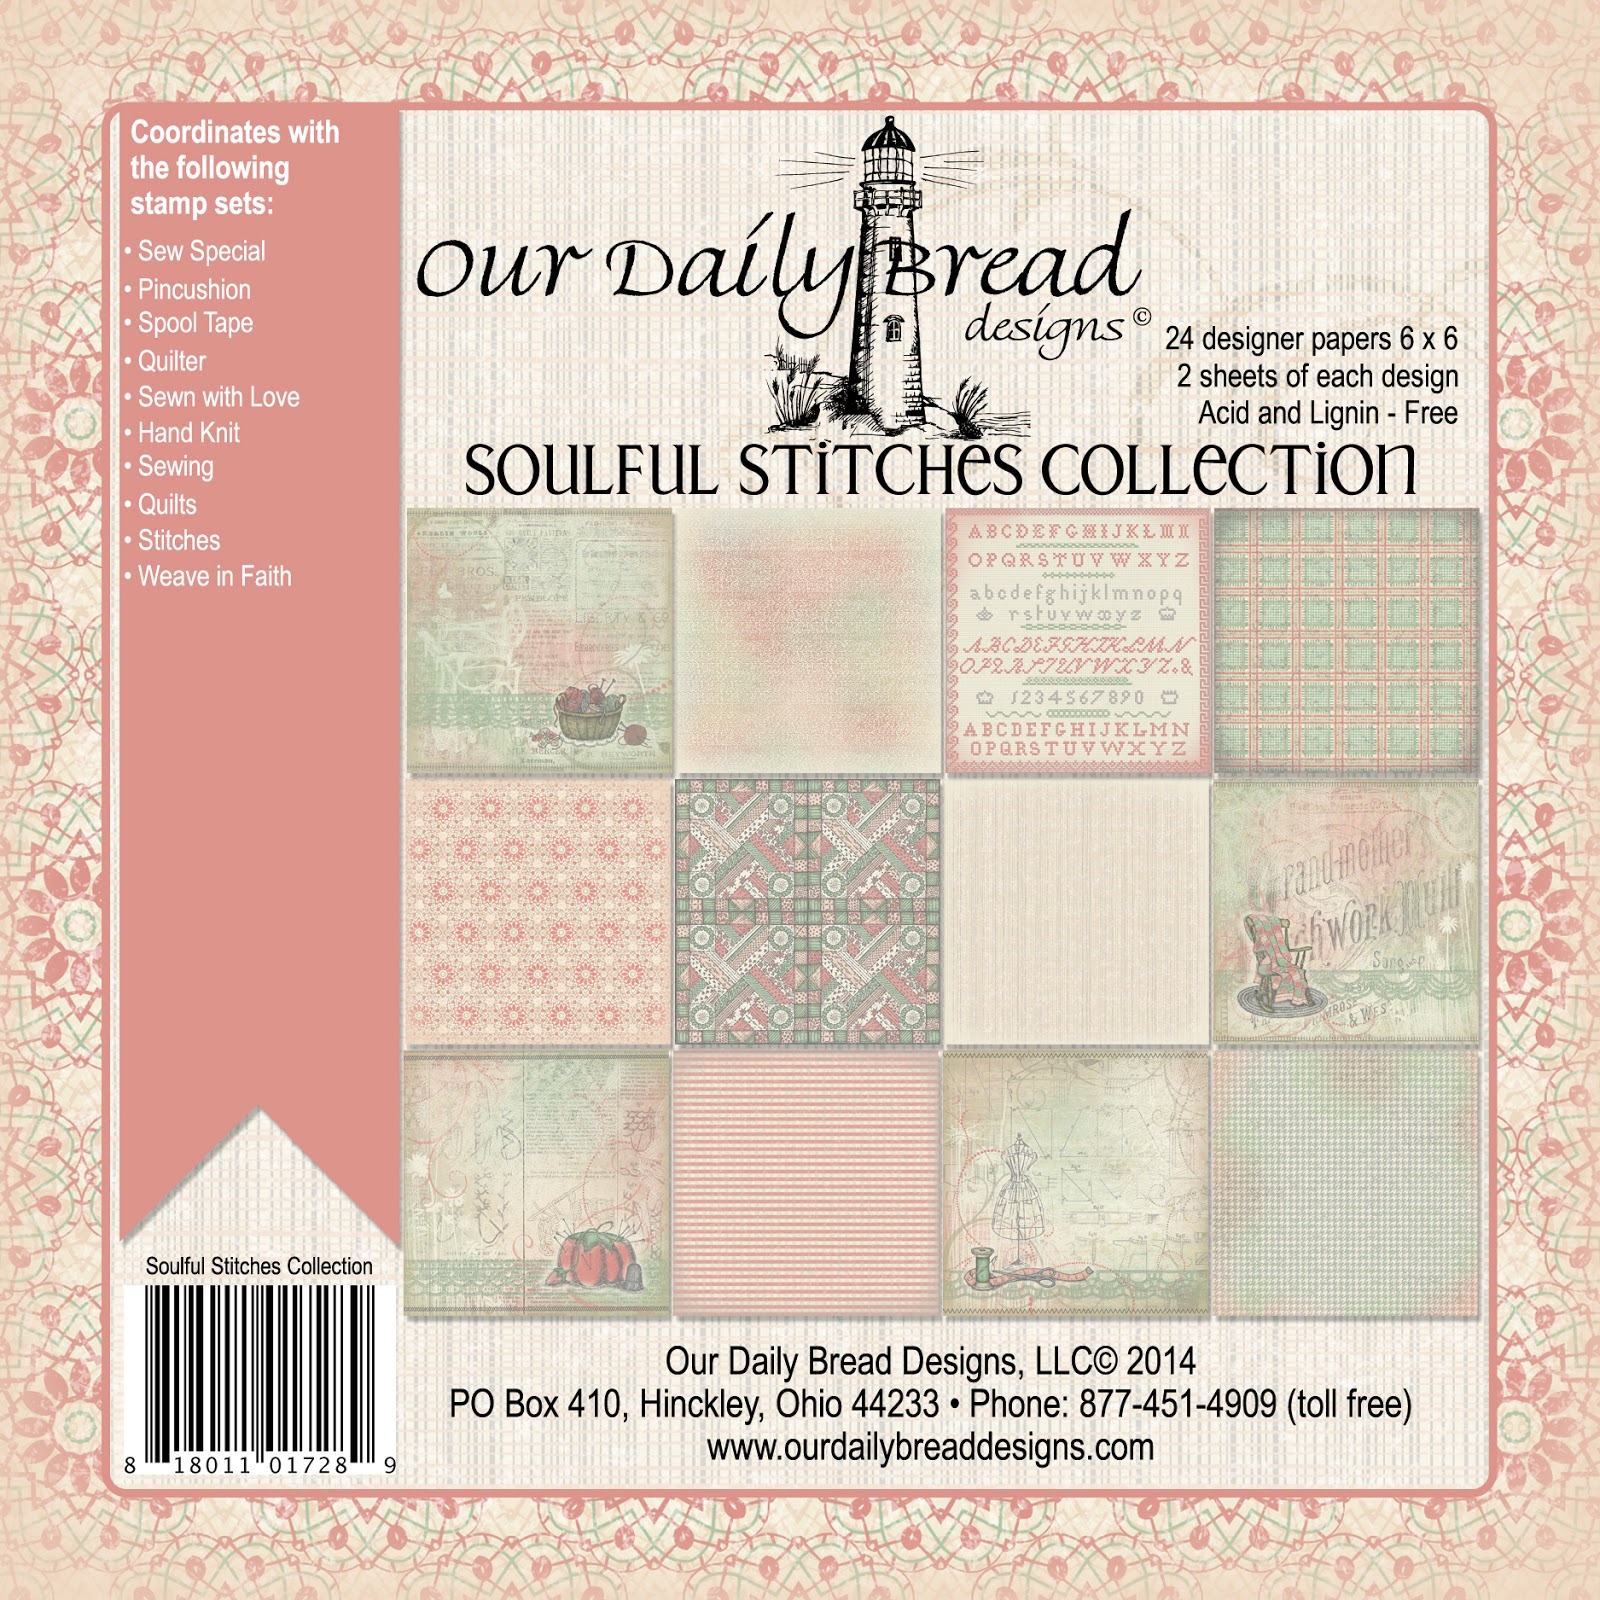 https://www.ourdailybreaddesigns.com/index.php/soulful-stitches-collection-6x6-paper-pad.html